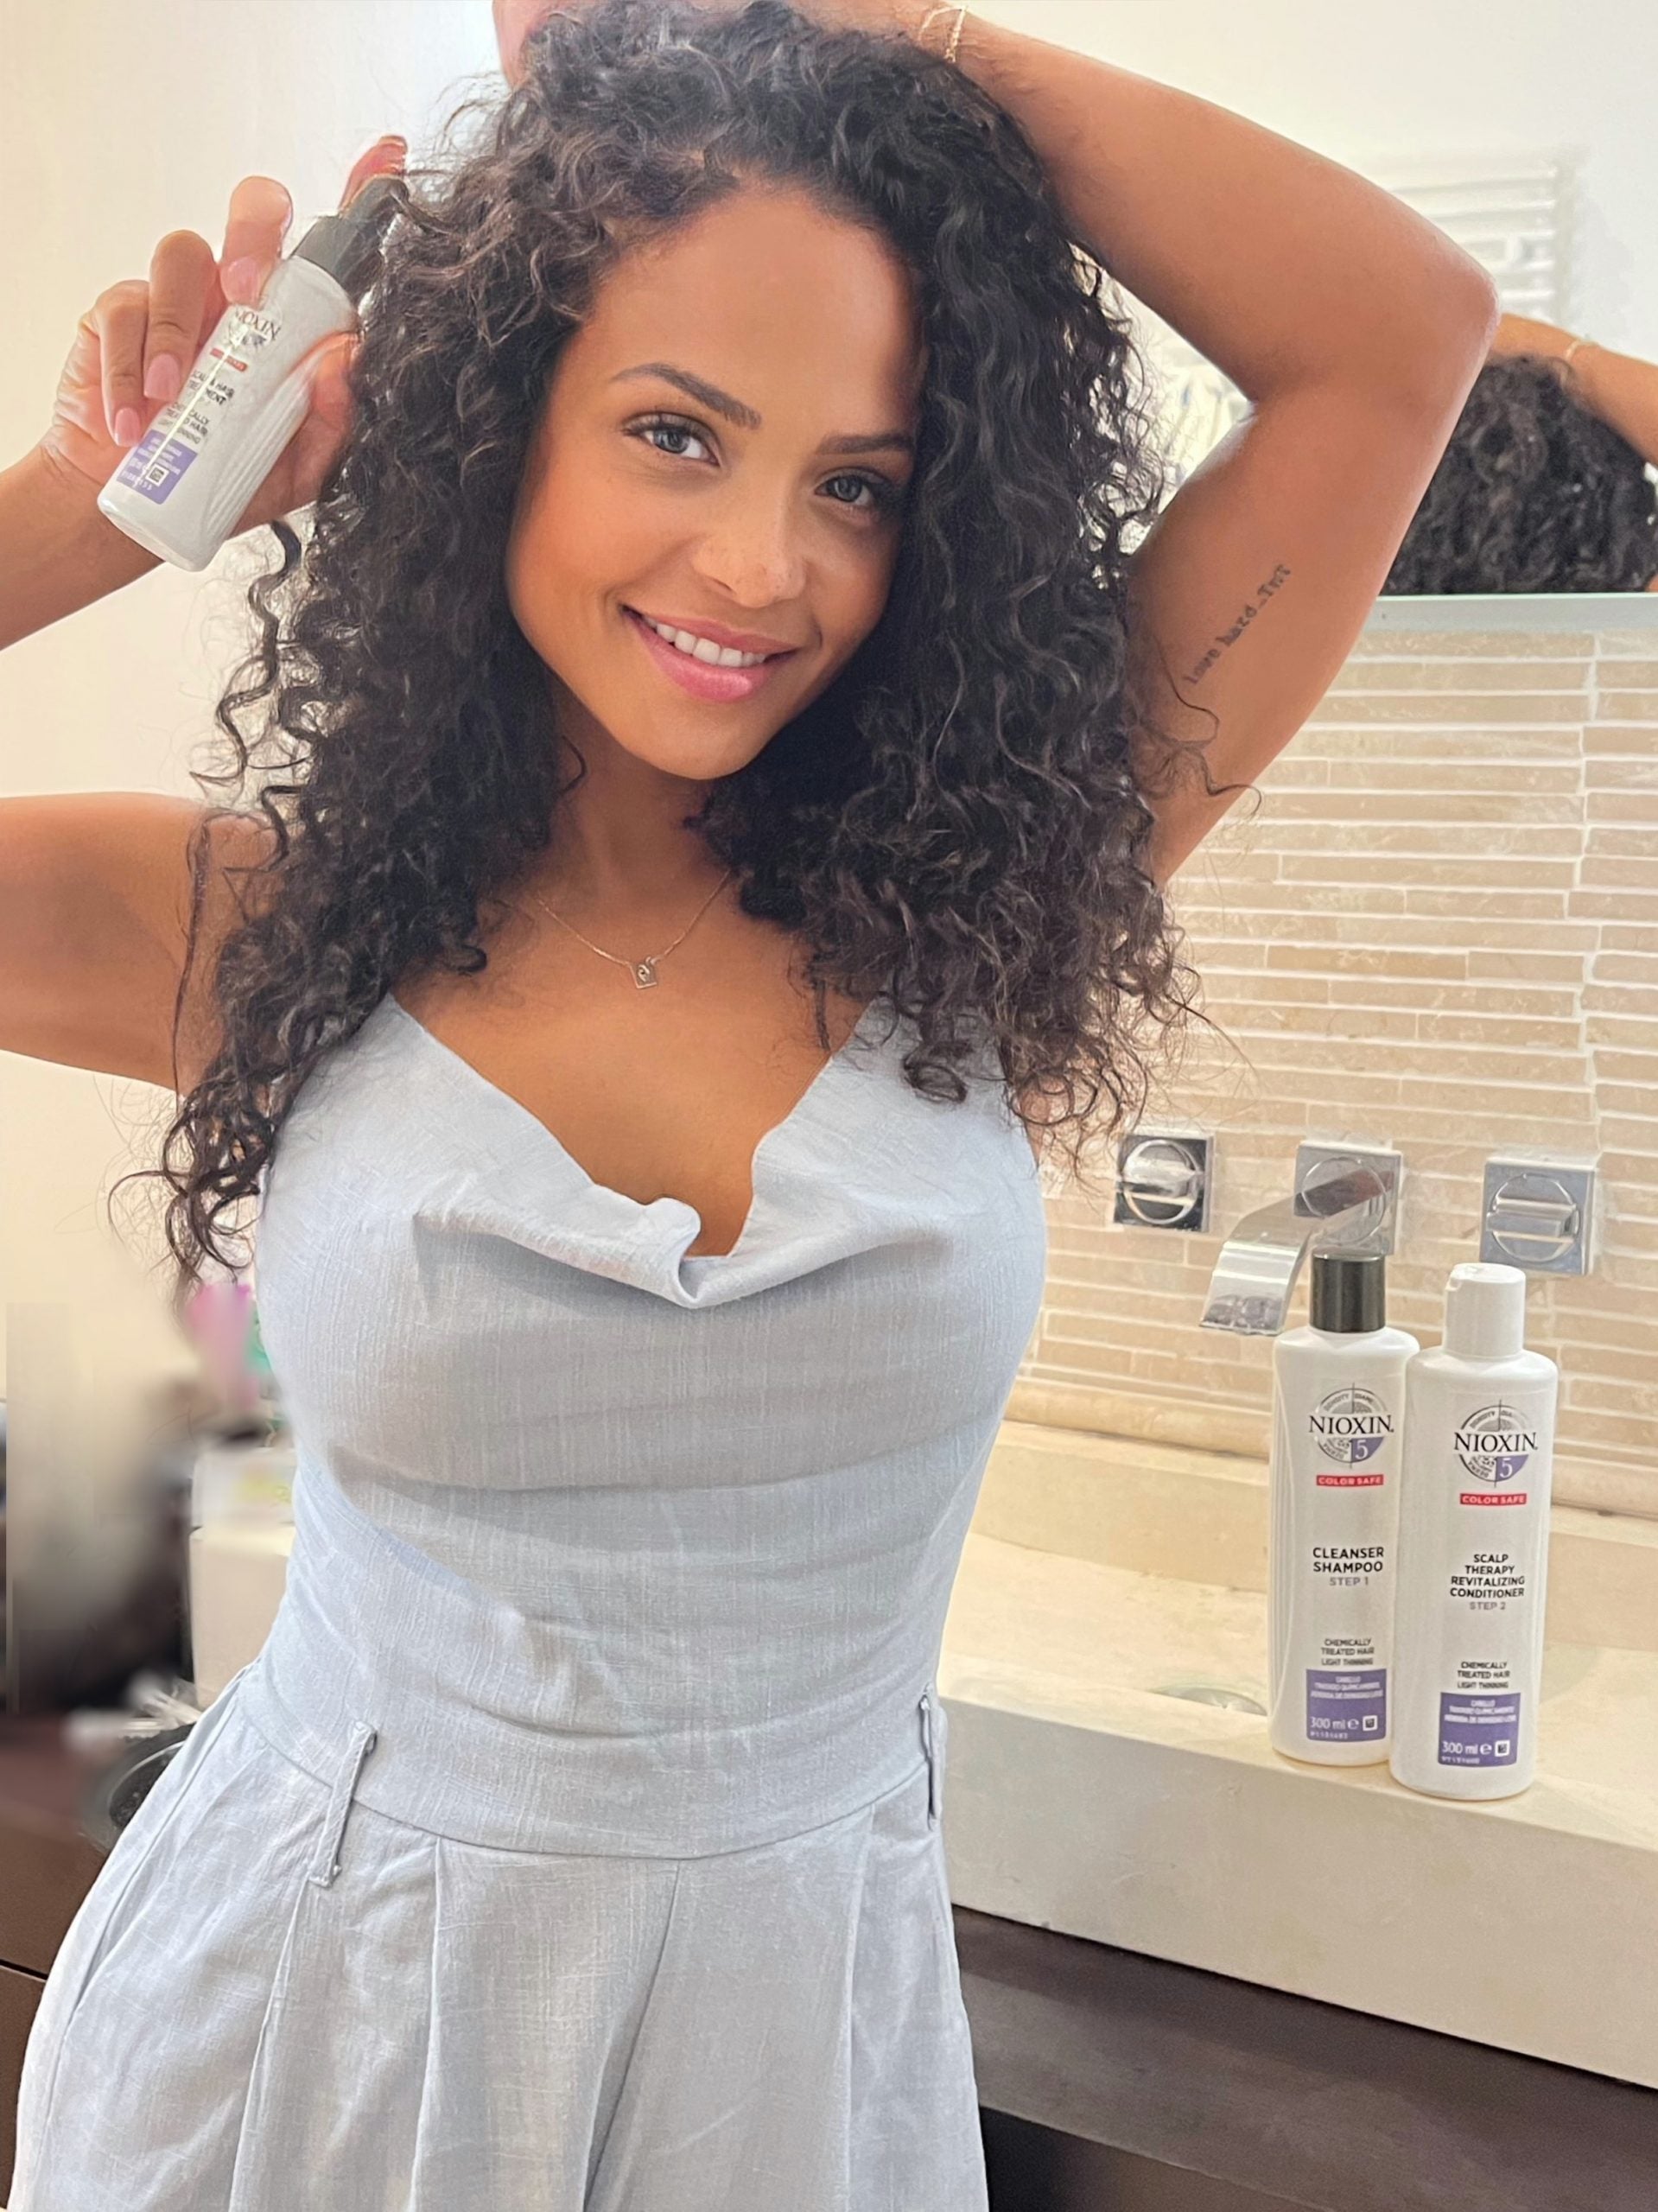 'My Hair Started Falling Out In Chunks': Christina Milian On Postpartum Hair Loss And Her Go-To Product To Combat It